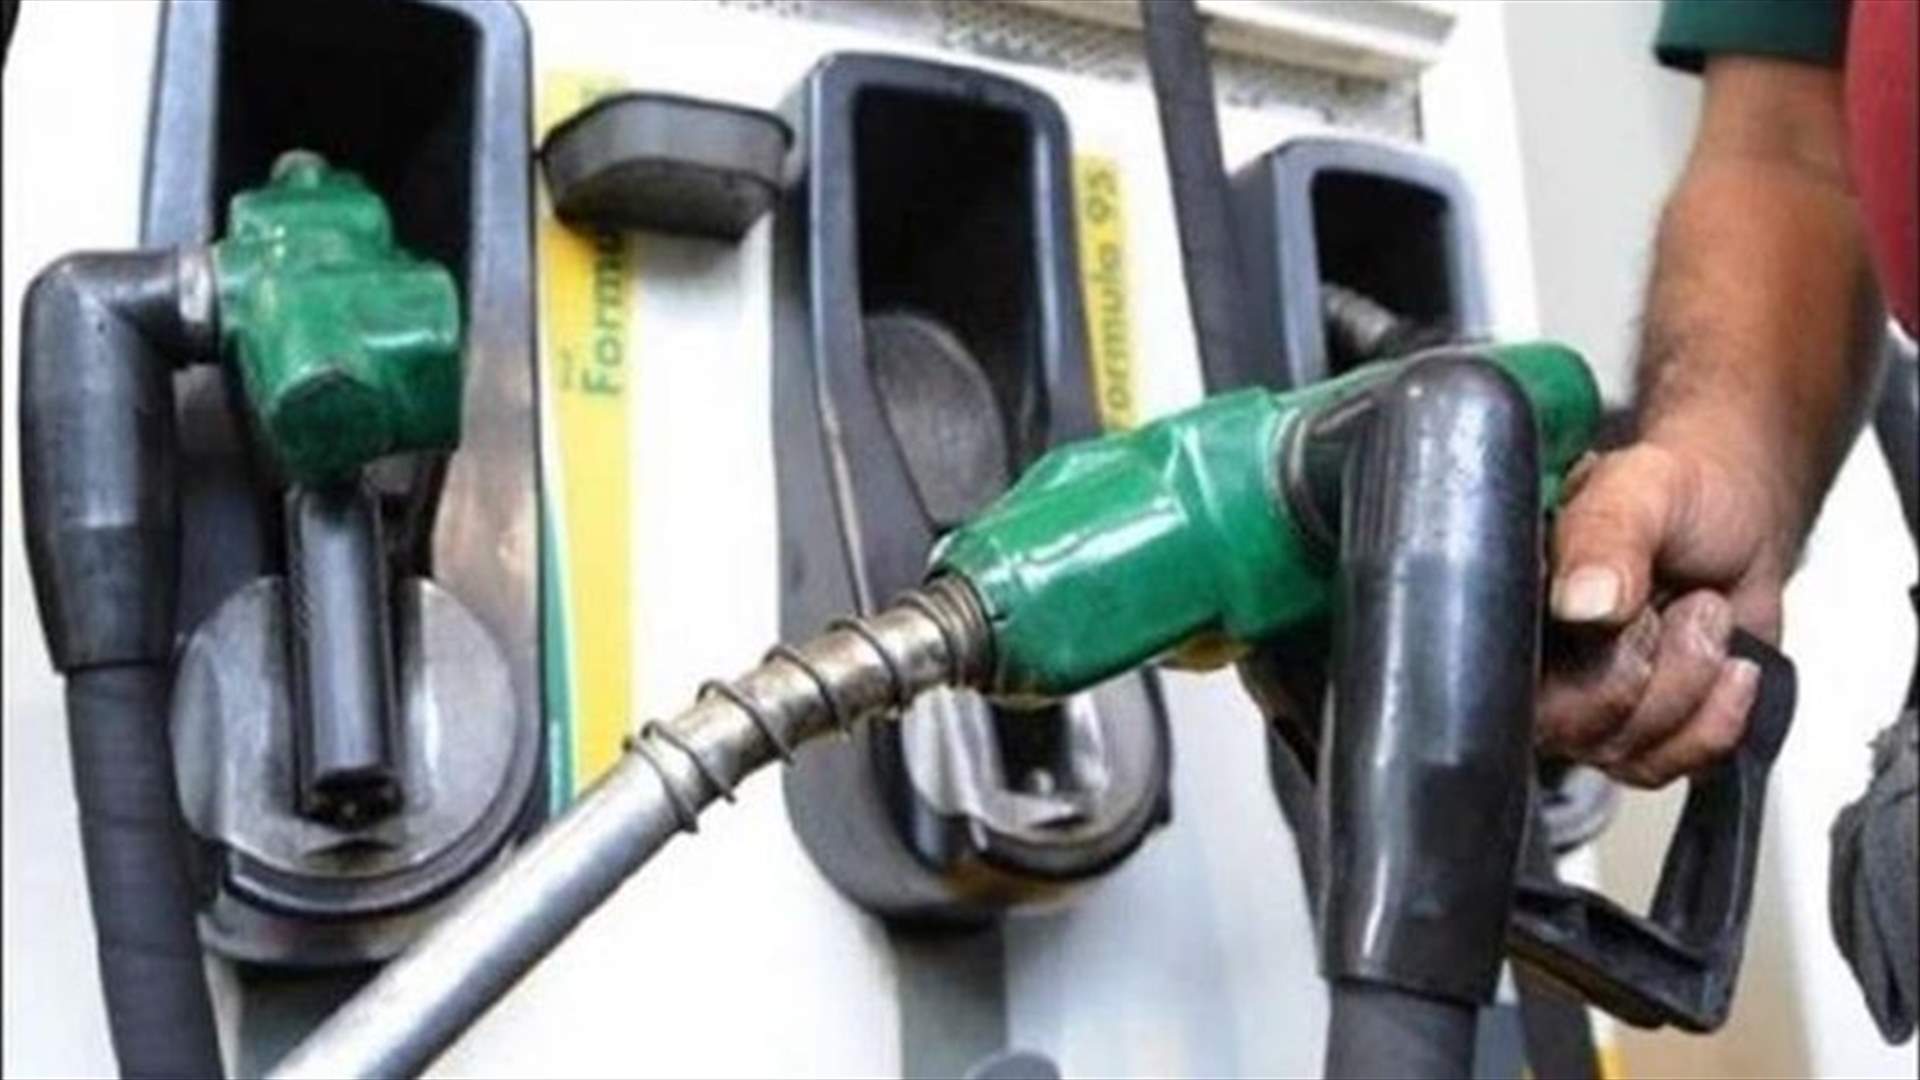 Lebanon’s fuel prices register further increase